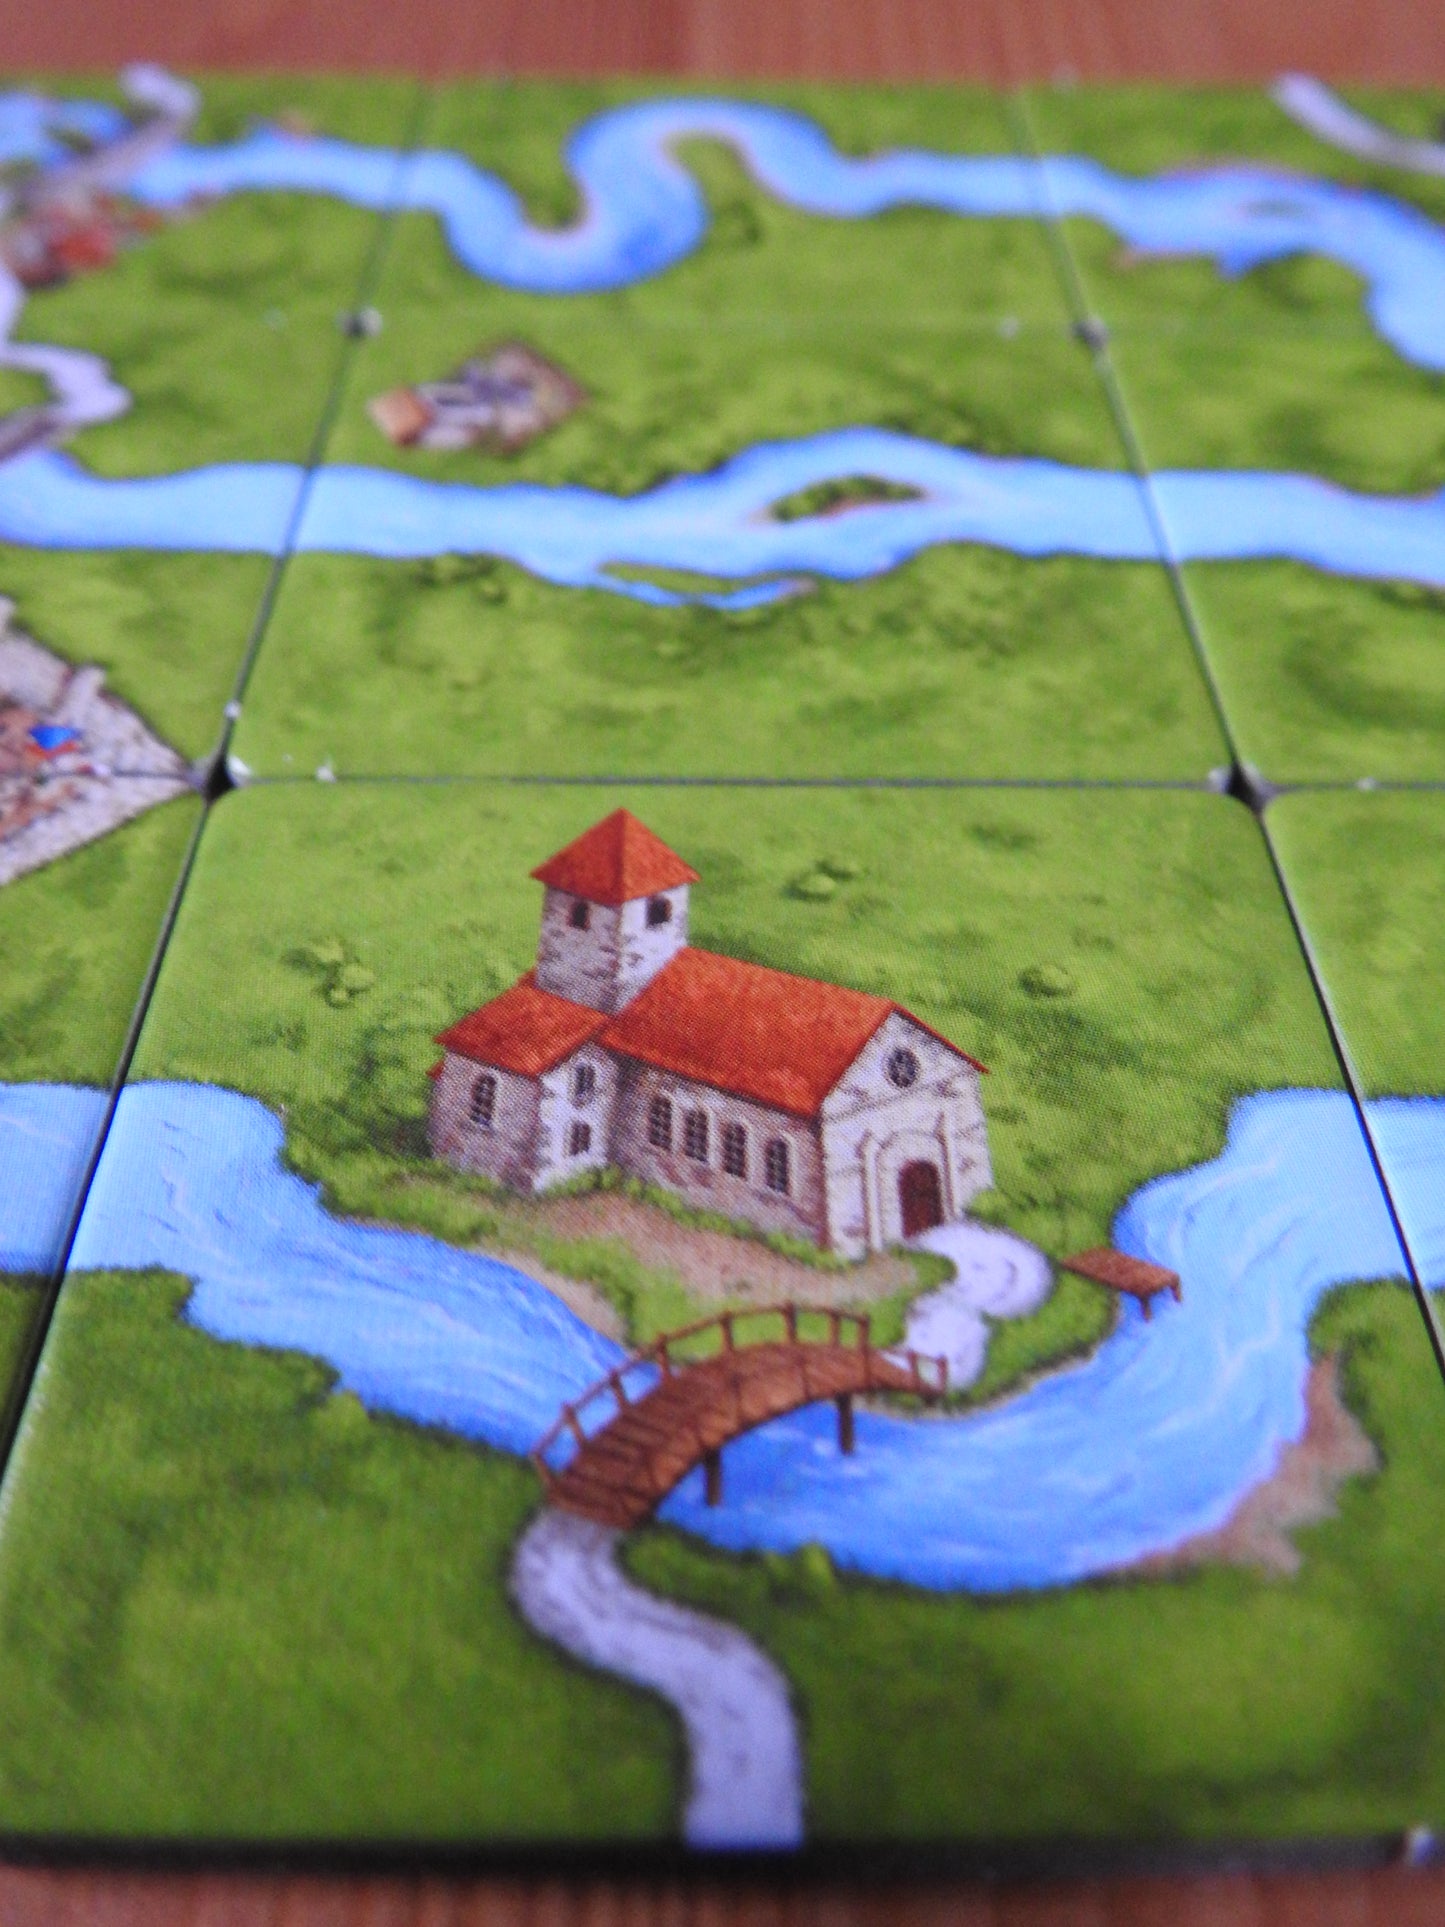 A close-up of an old monastery next to a bridge on the river in this River I mini expansion for Carcassonne.